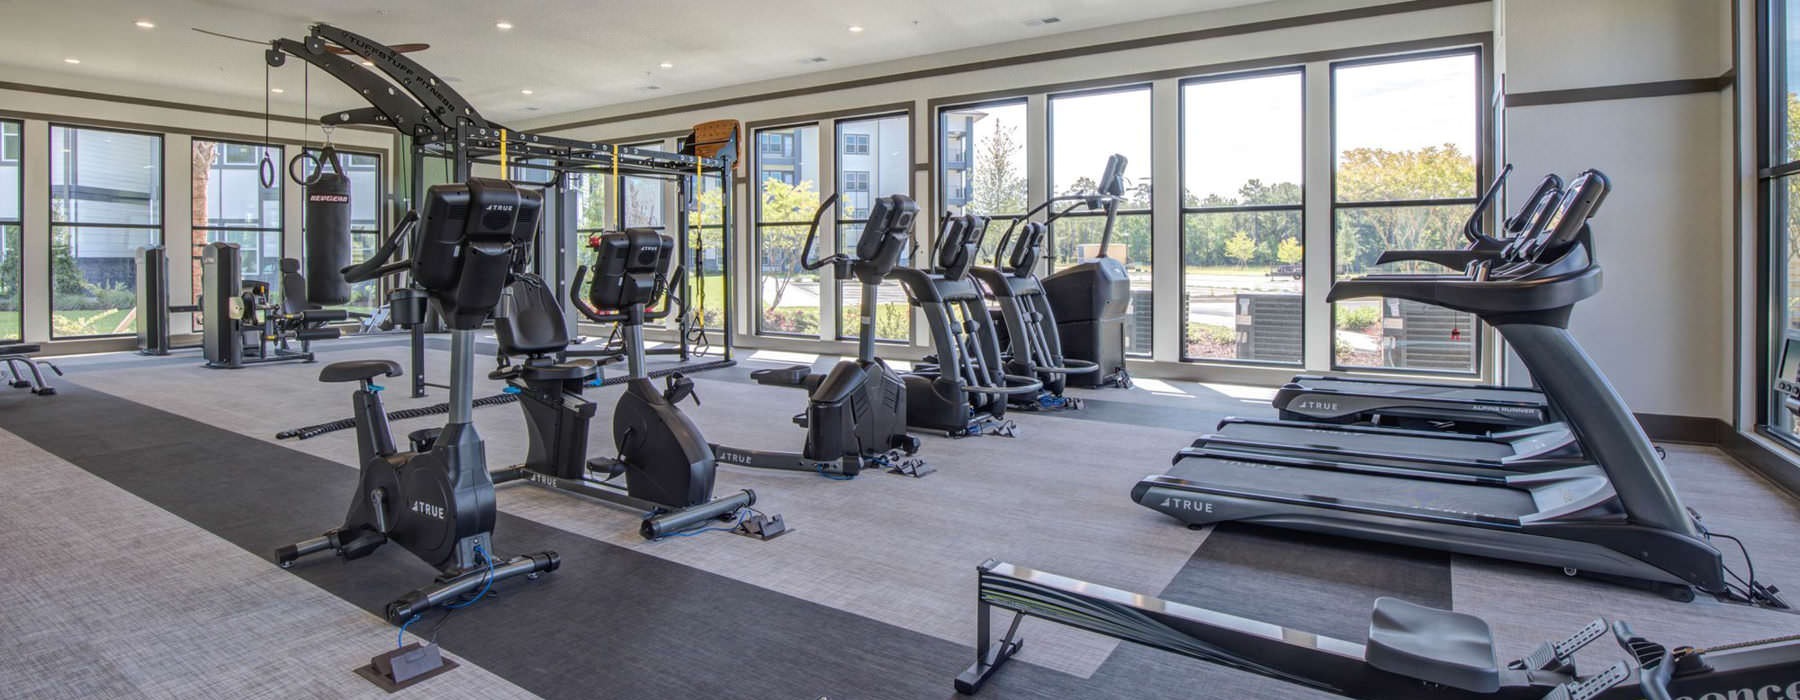 well equipped fitness center surrounded by large windows